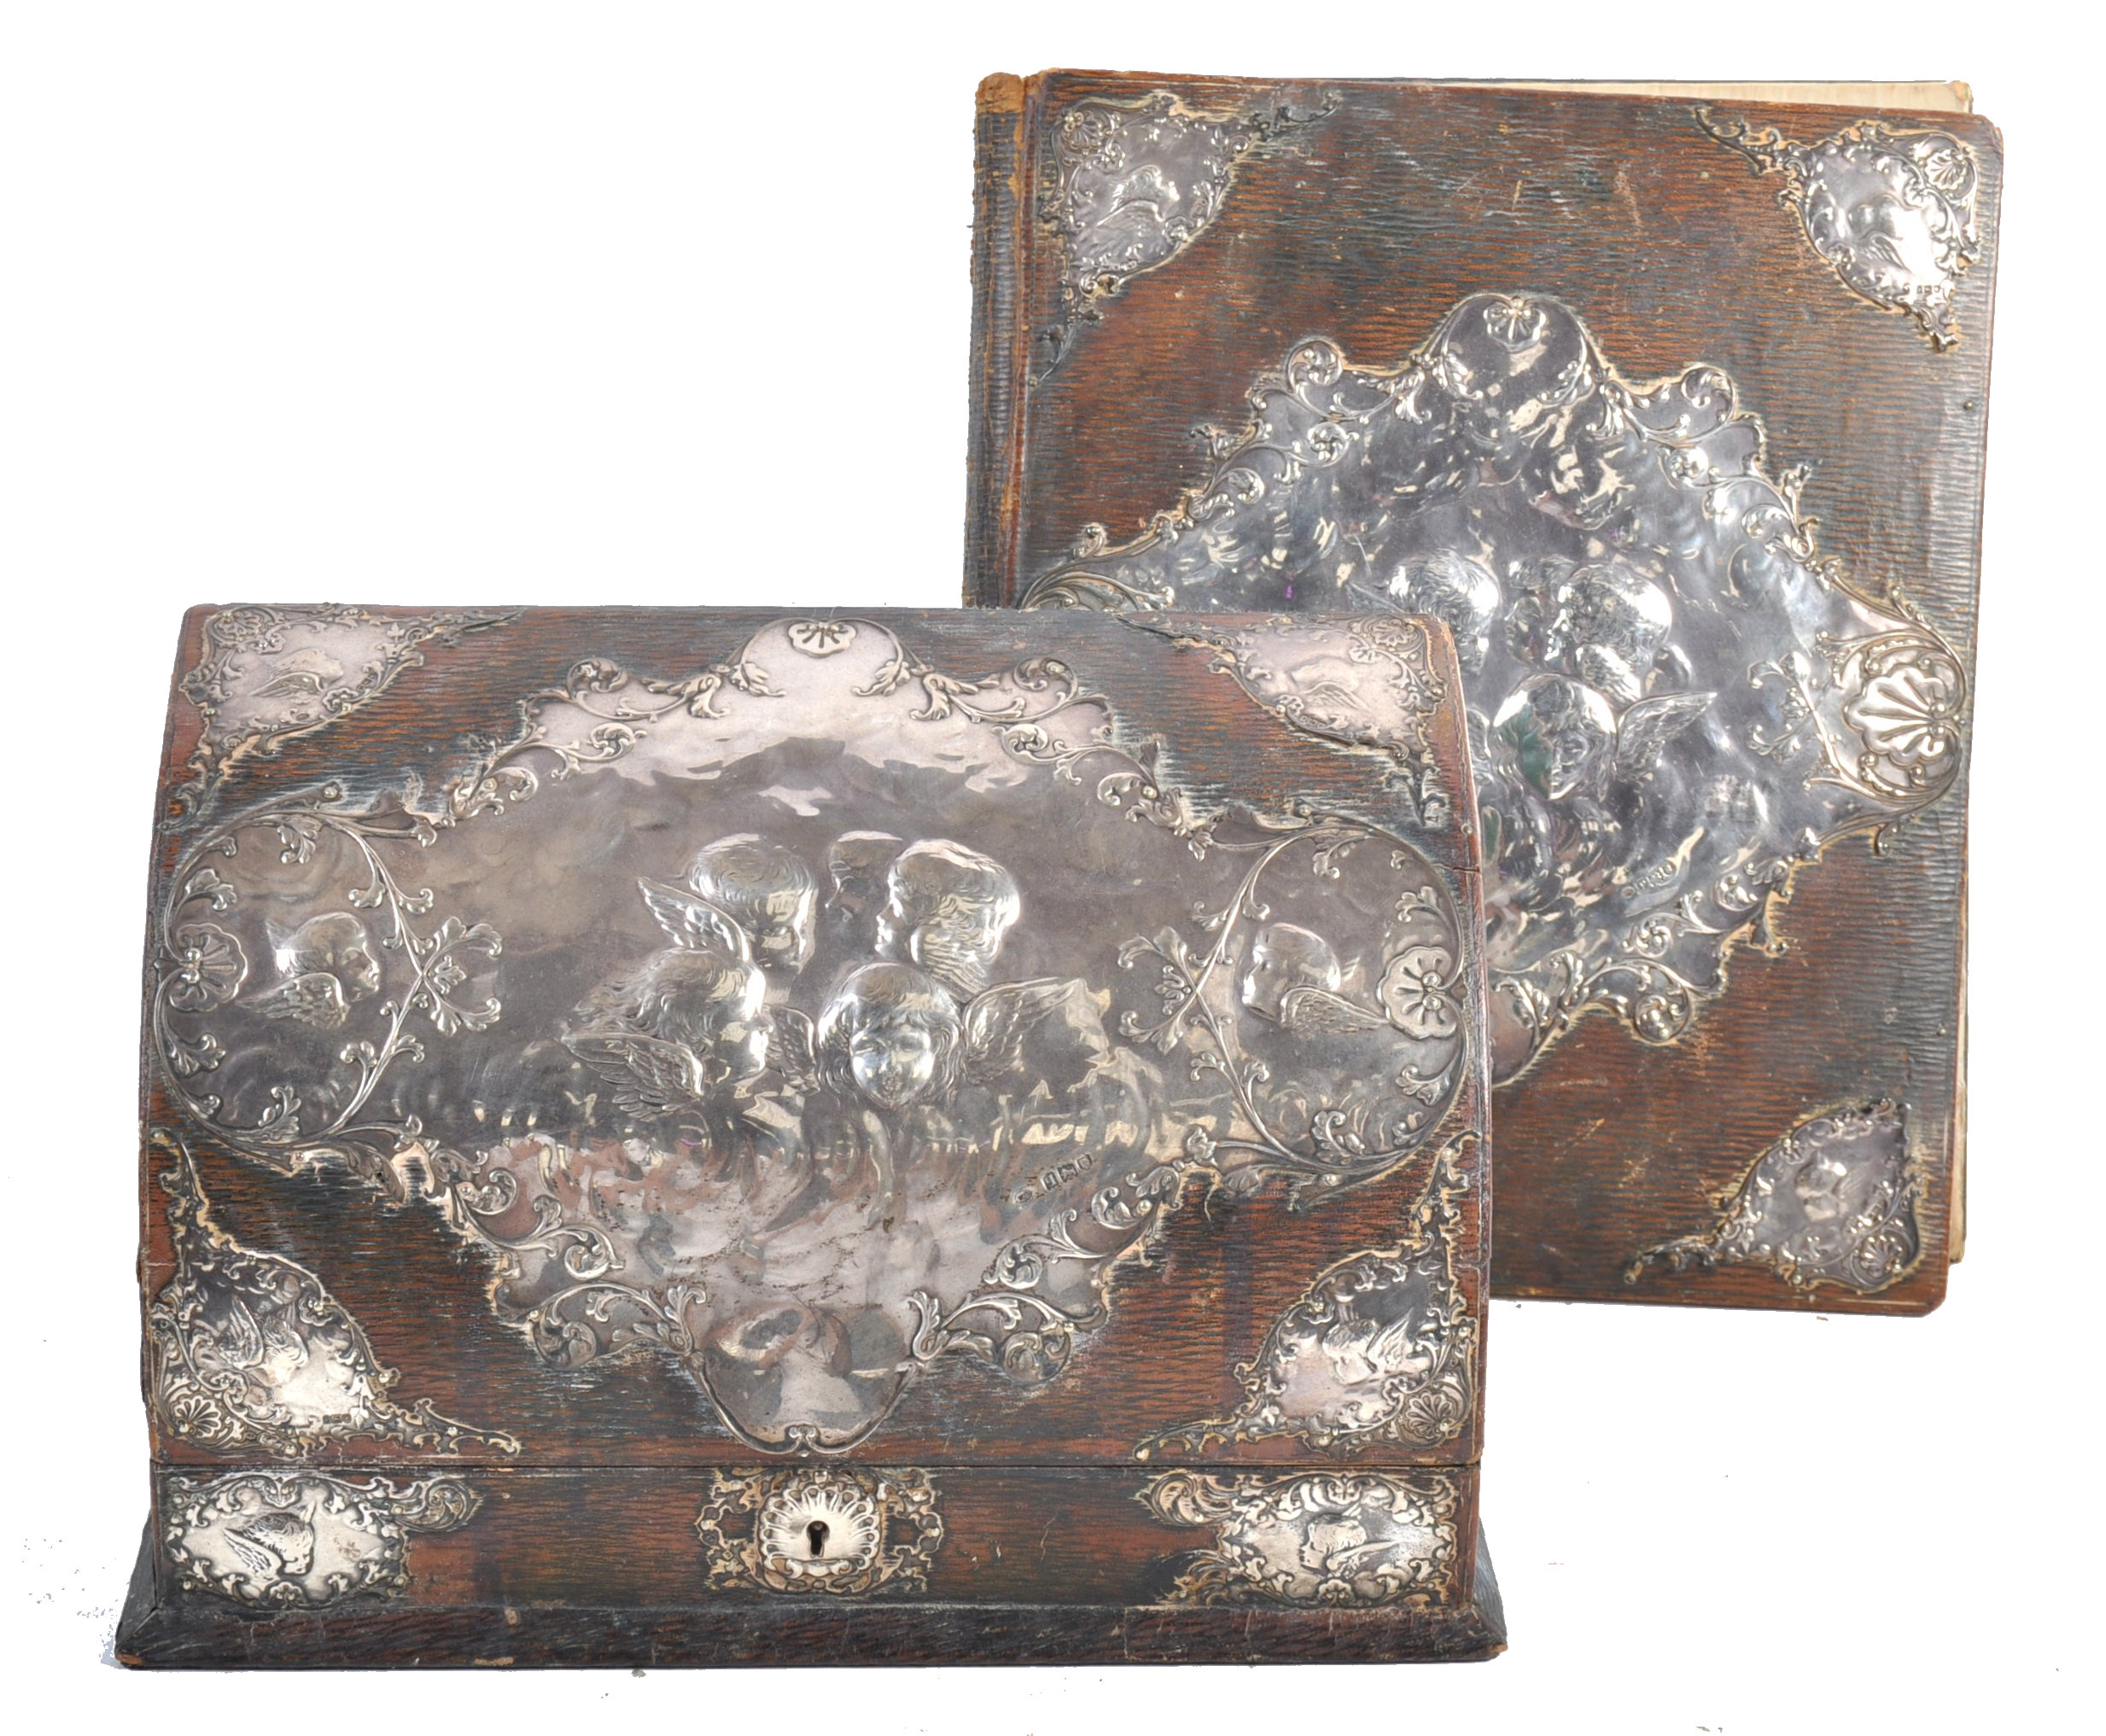 PAIR OF SILVER AND LEATHER DESK ITEMS BY WILLIAM COMYNS